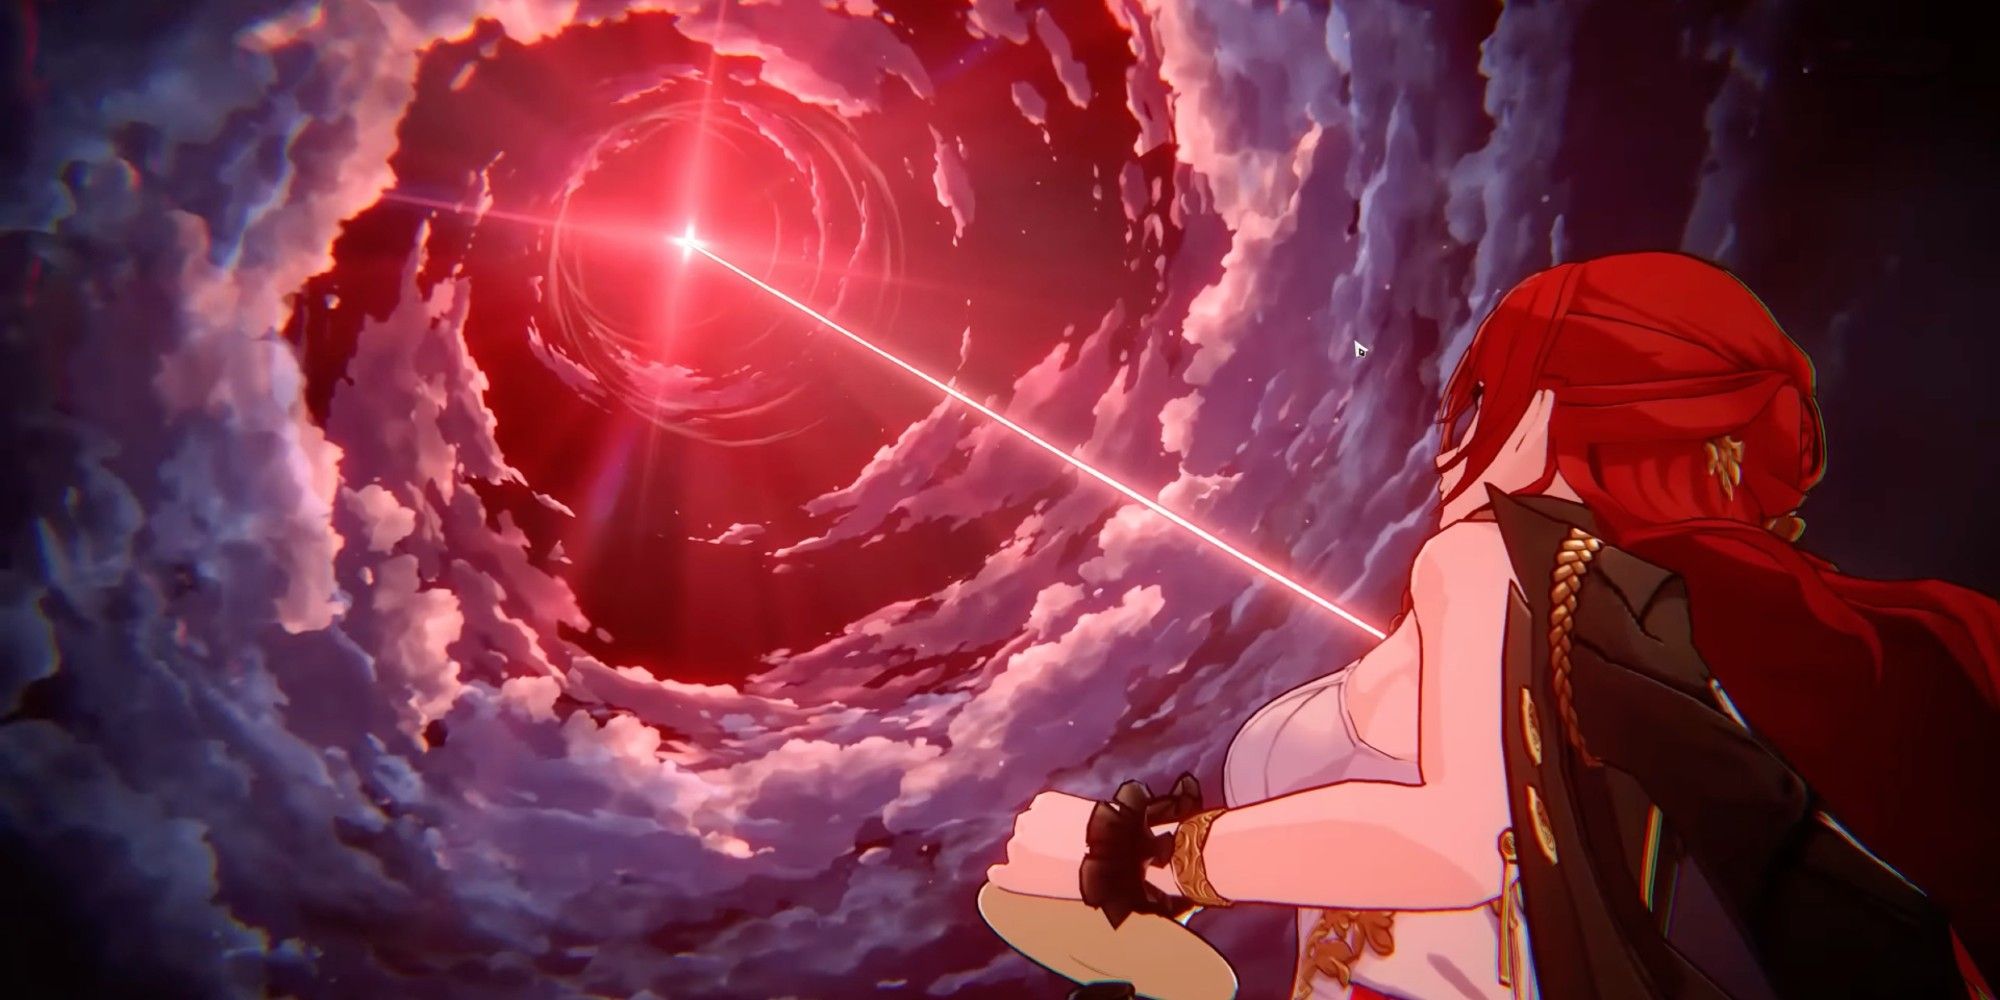 Himeko sips tea while watching her attack form in the sky